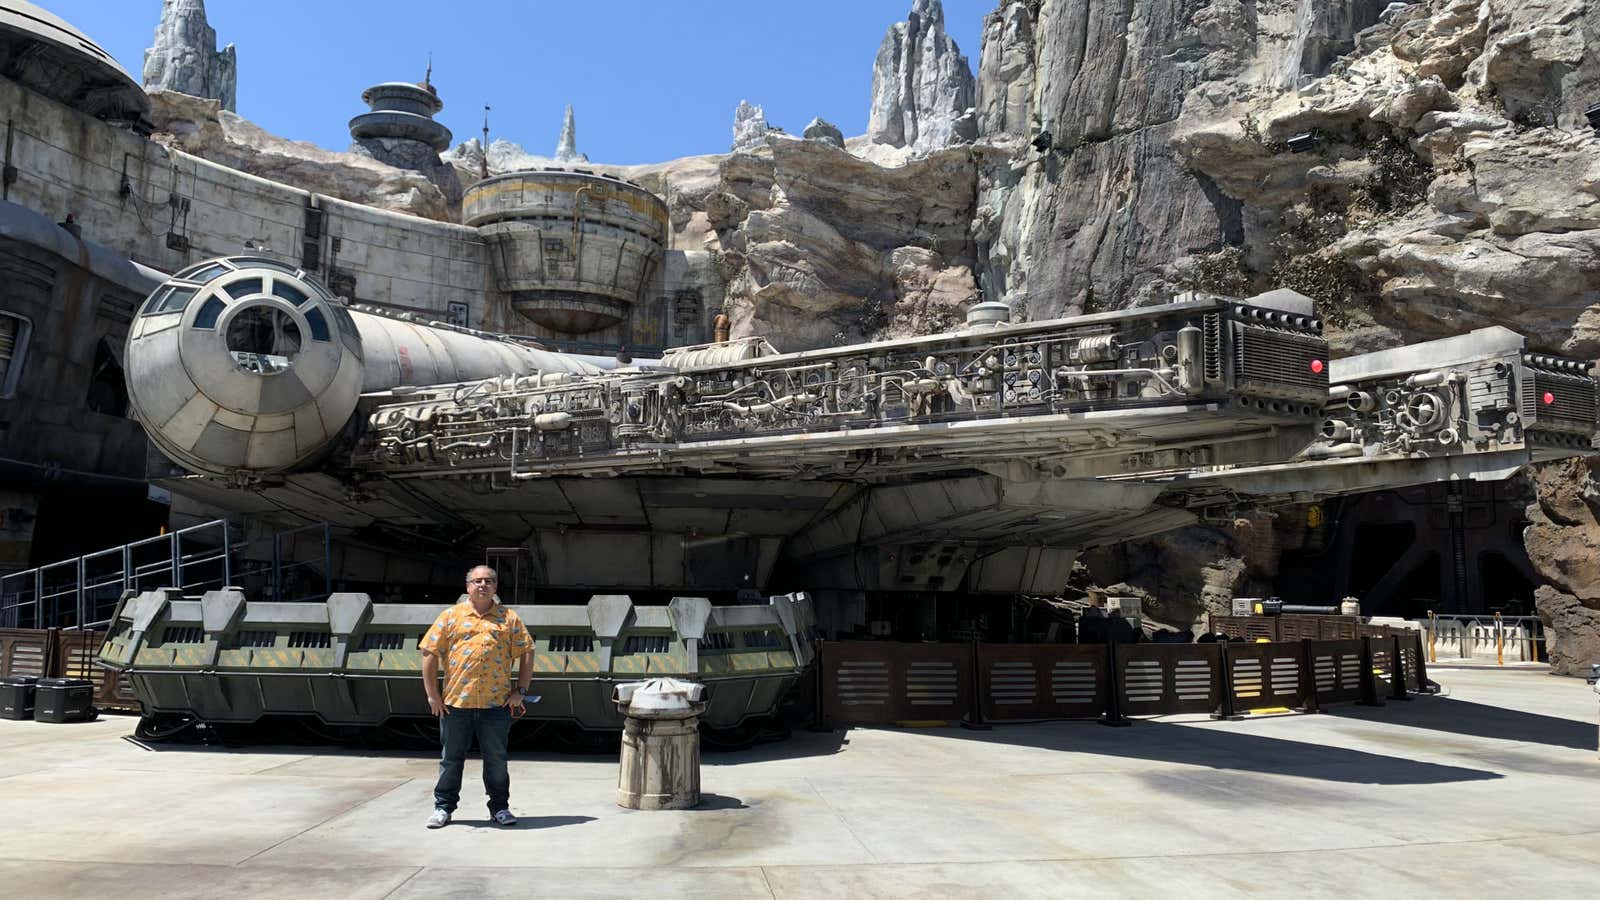 Disneyland to close some attractions to build 'Star Wars' land